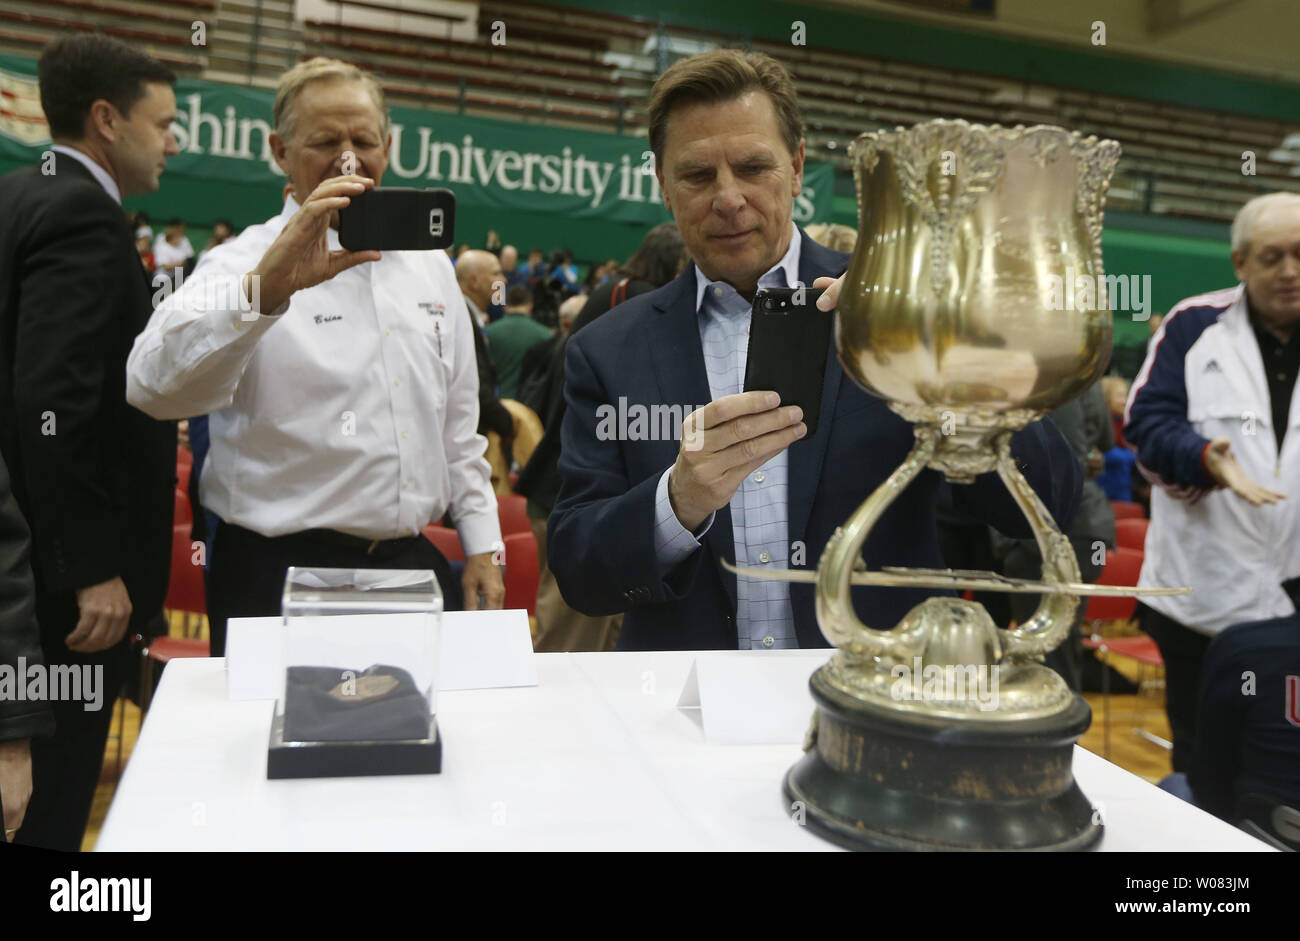 Attendees at Washington University photograph the National Regatta Trophy won by the St. Louis Rowing Club at the 1904 Olympics following a press conference at Washington University in St. Louis on on February 5, 2018.  It was announced that an Olympic Legacy Committee has been formed that will remember the Summer Olympics that were held at the campus in 1904. The project has beeen approved by the International Olympic Committee which will allow the display of the Olympic Rings. St. Louis is one of only 23 cities in the world and three in the United States to host the summer games. The goal of Stock Photo